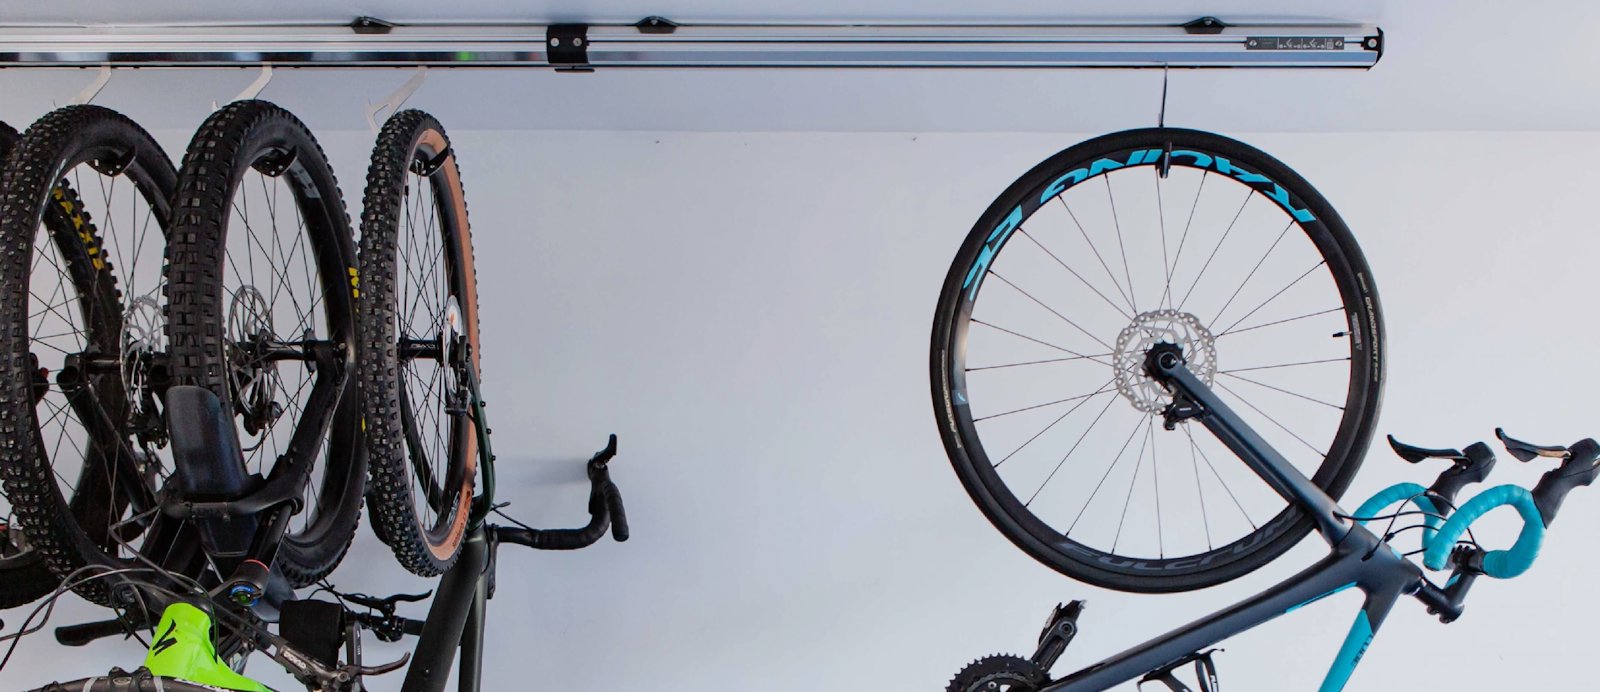 The Stashed Products SpaceRail bicycle storage system